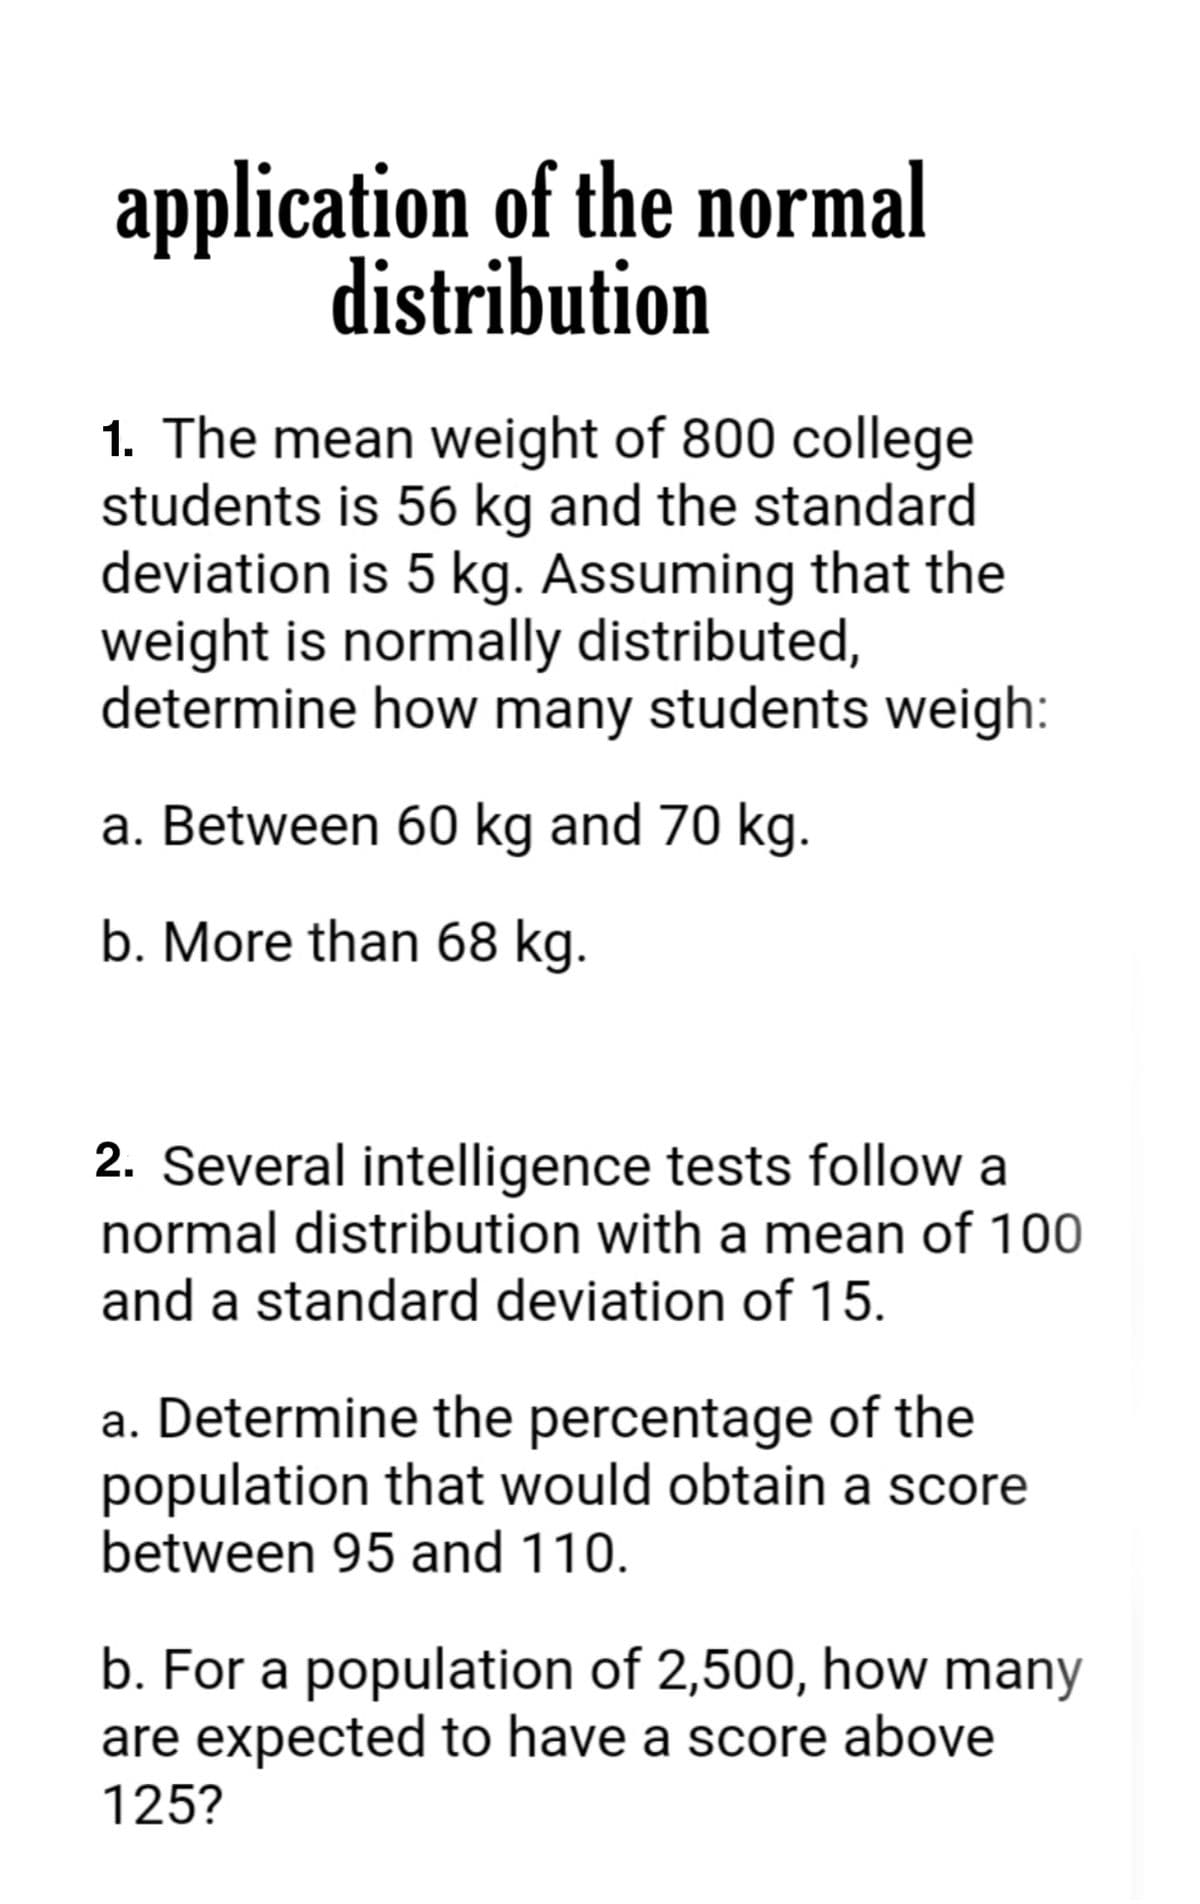 application of the normal
distribution
1. The mean weight of 800 college
students is 56 kg and the standard
deviation is 5 kg. Assuming that the
weight is normally distributed,
determine how many students weigh:
a. Between 60 kg and 70 kg.
b. More than 68 kg.
2. Several intelligence tests follow a
normal distribution with a mean of 100
and a standard deviation of 15.
a. Determine the percentage of the
population that would obtain a score
between 95 and 110.
b. For a population of 2,500, how many
are expected to have a score above
125?
